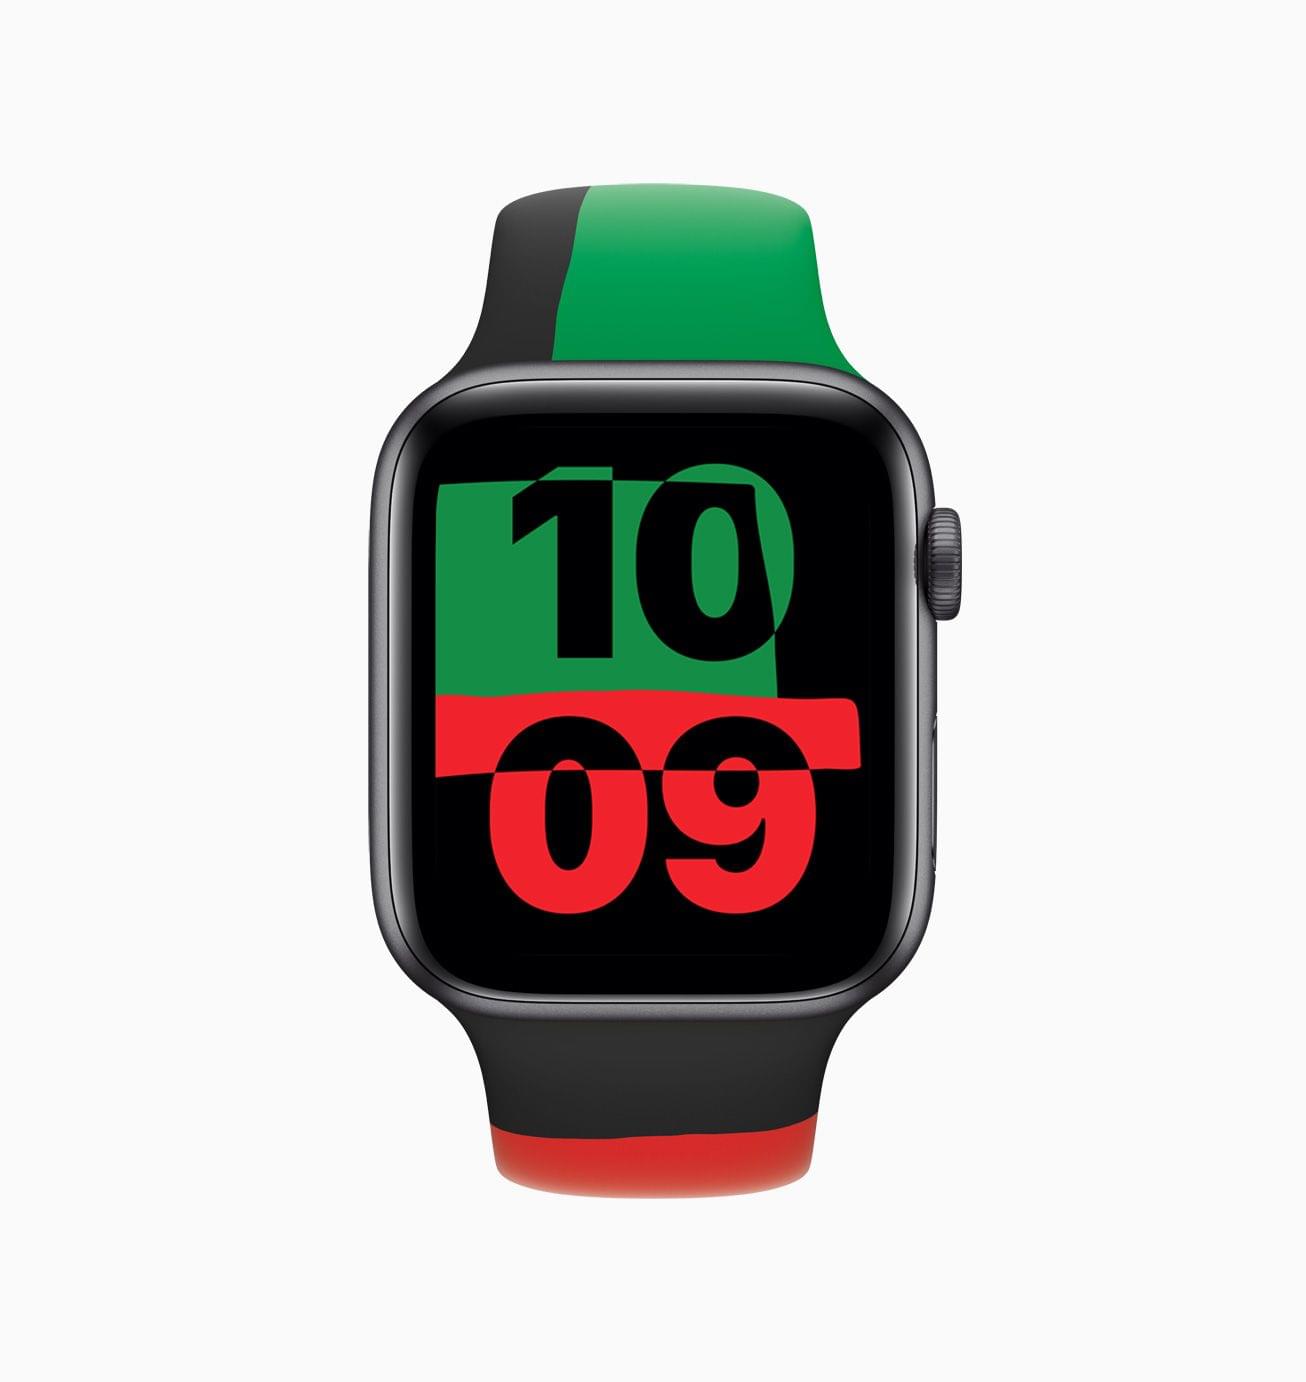 The Apple Watch Unity watch face is part of watchOS 7.3.